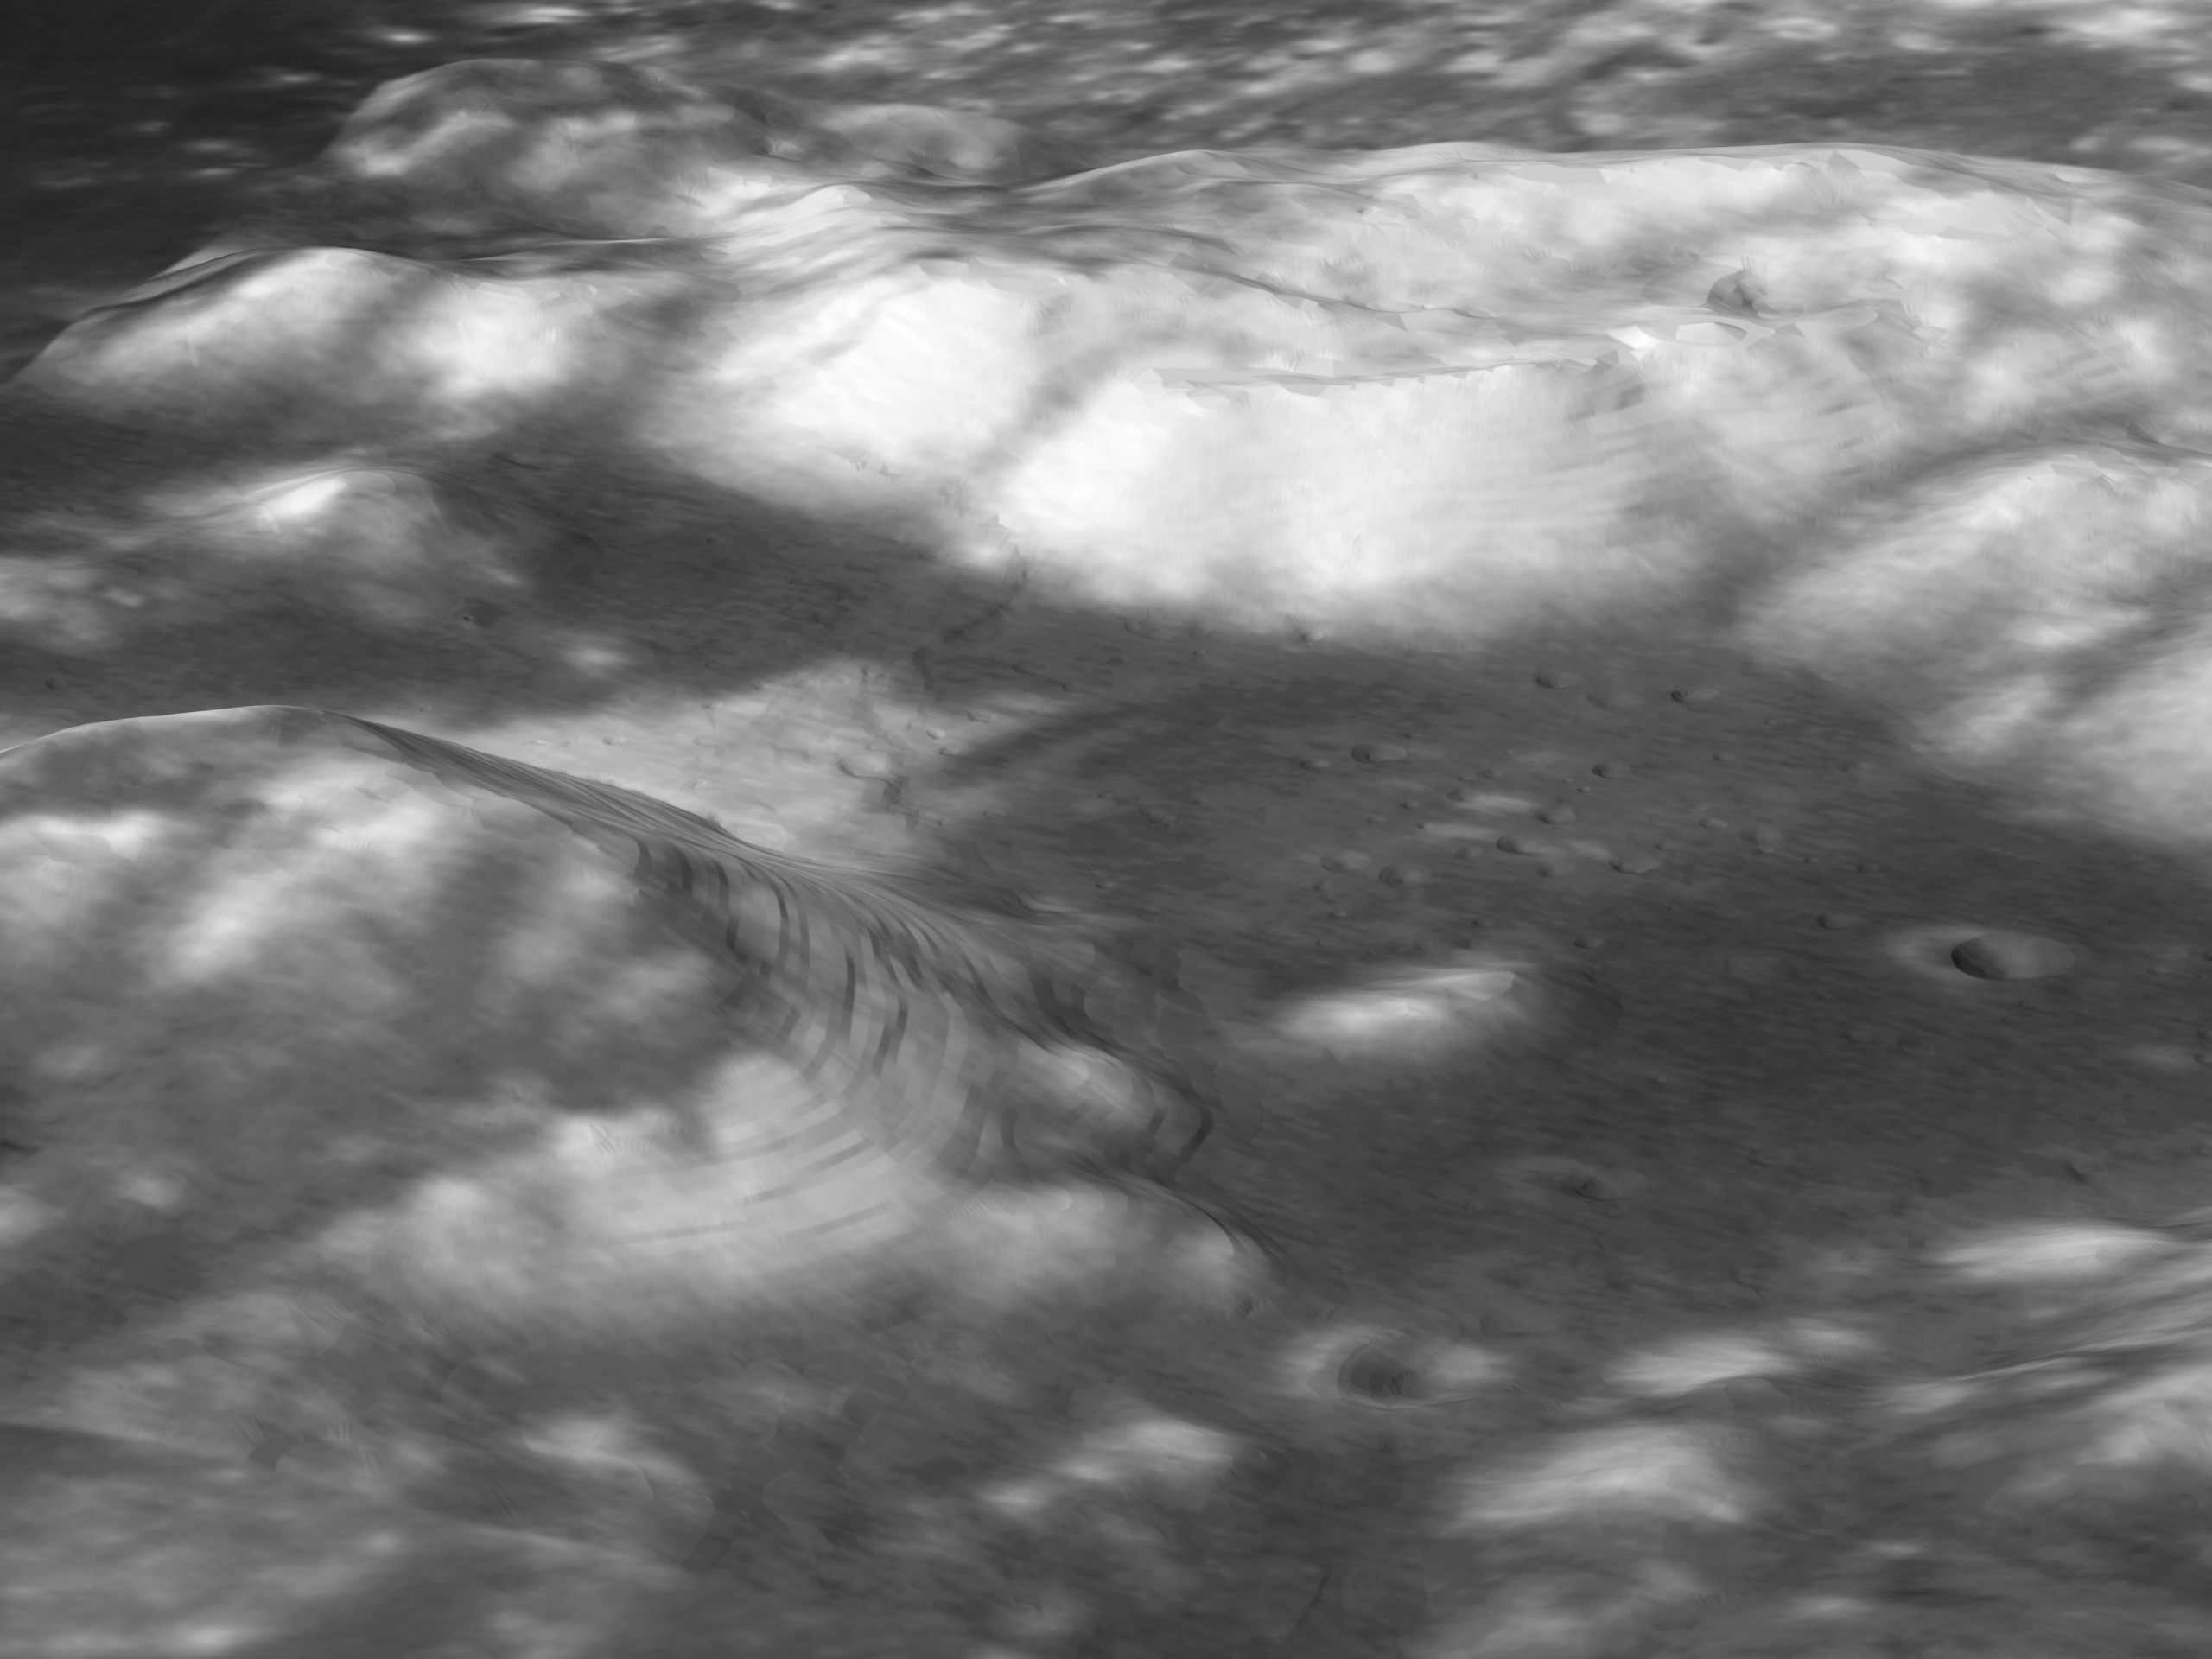 HST imagery of the Apollo 17 landing site draped over Apollo 17 derived topography